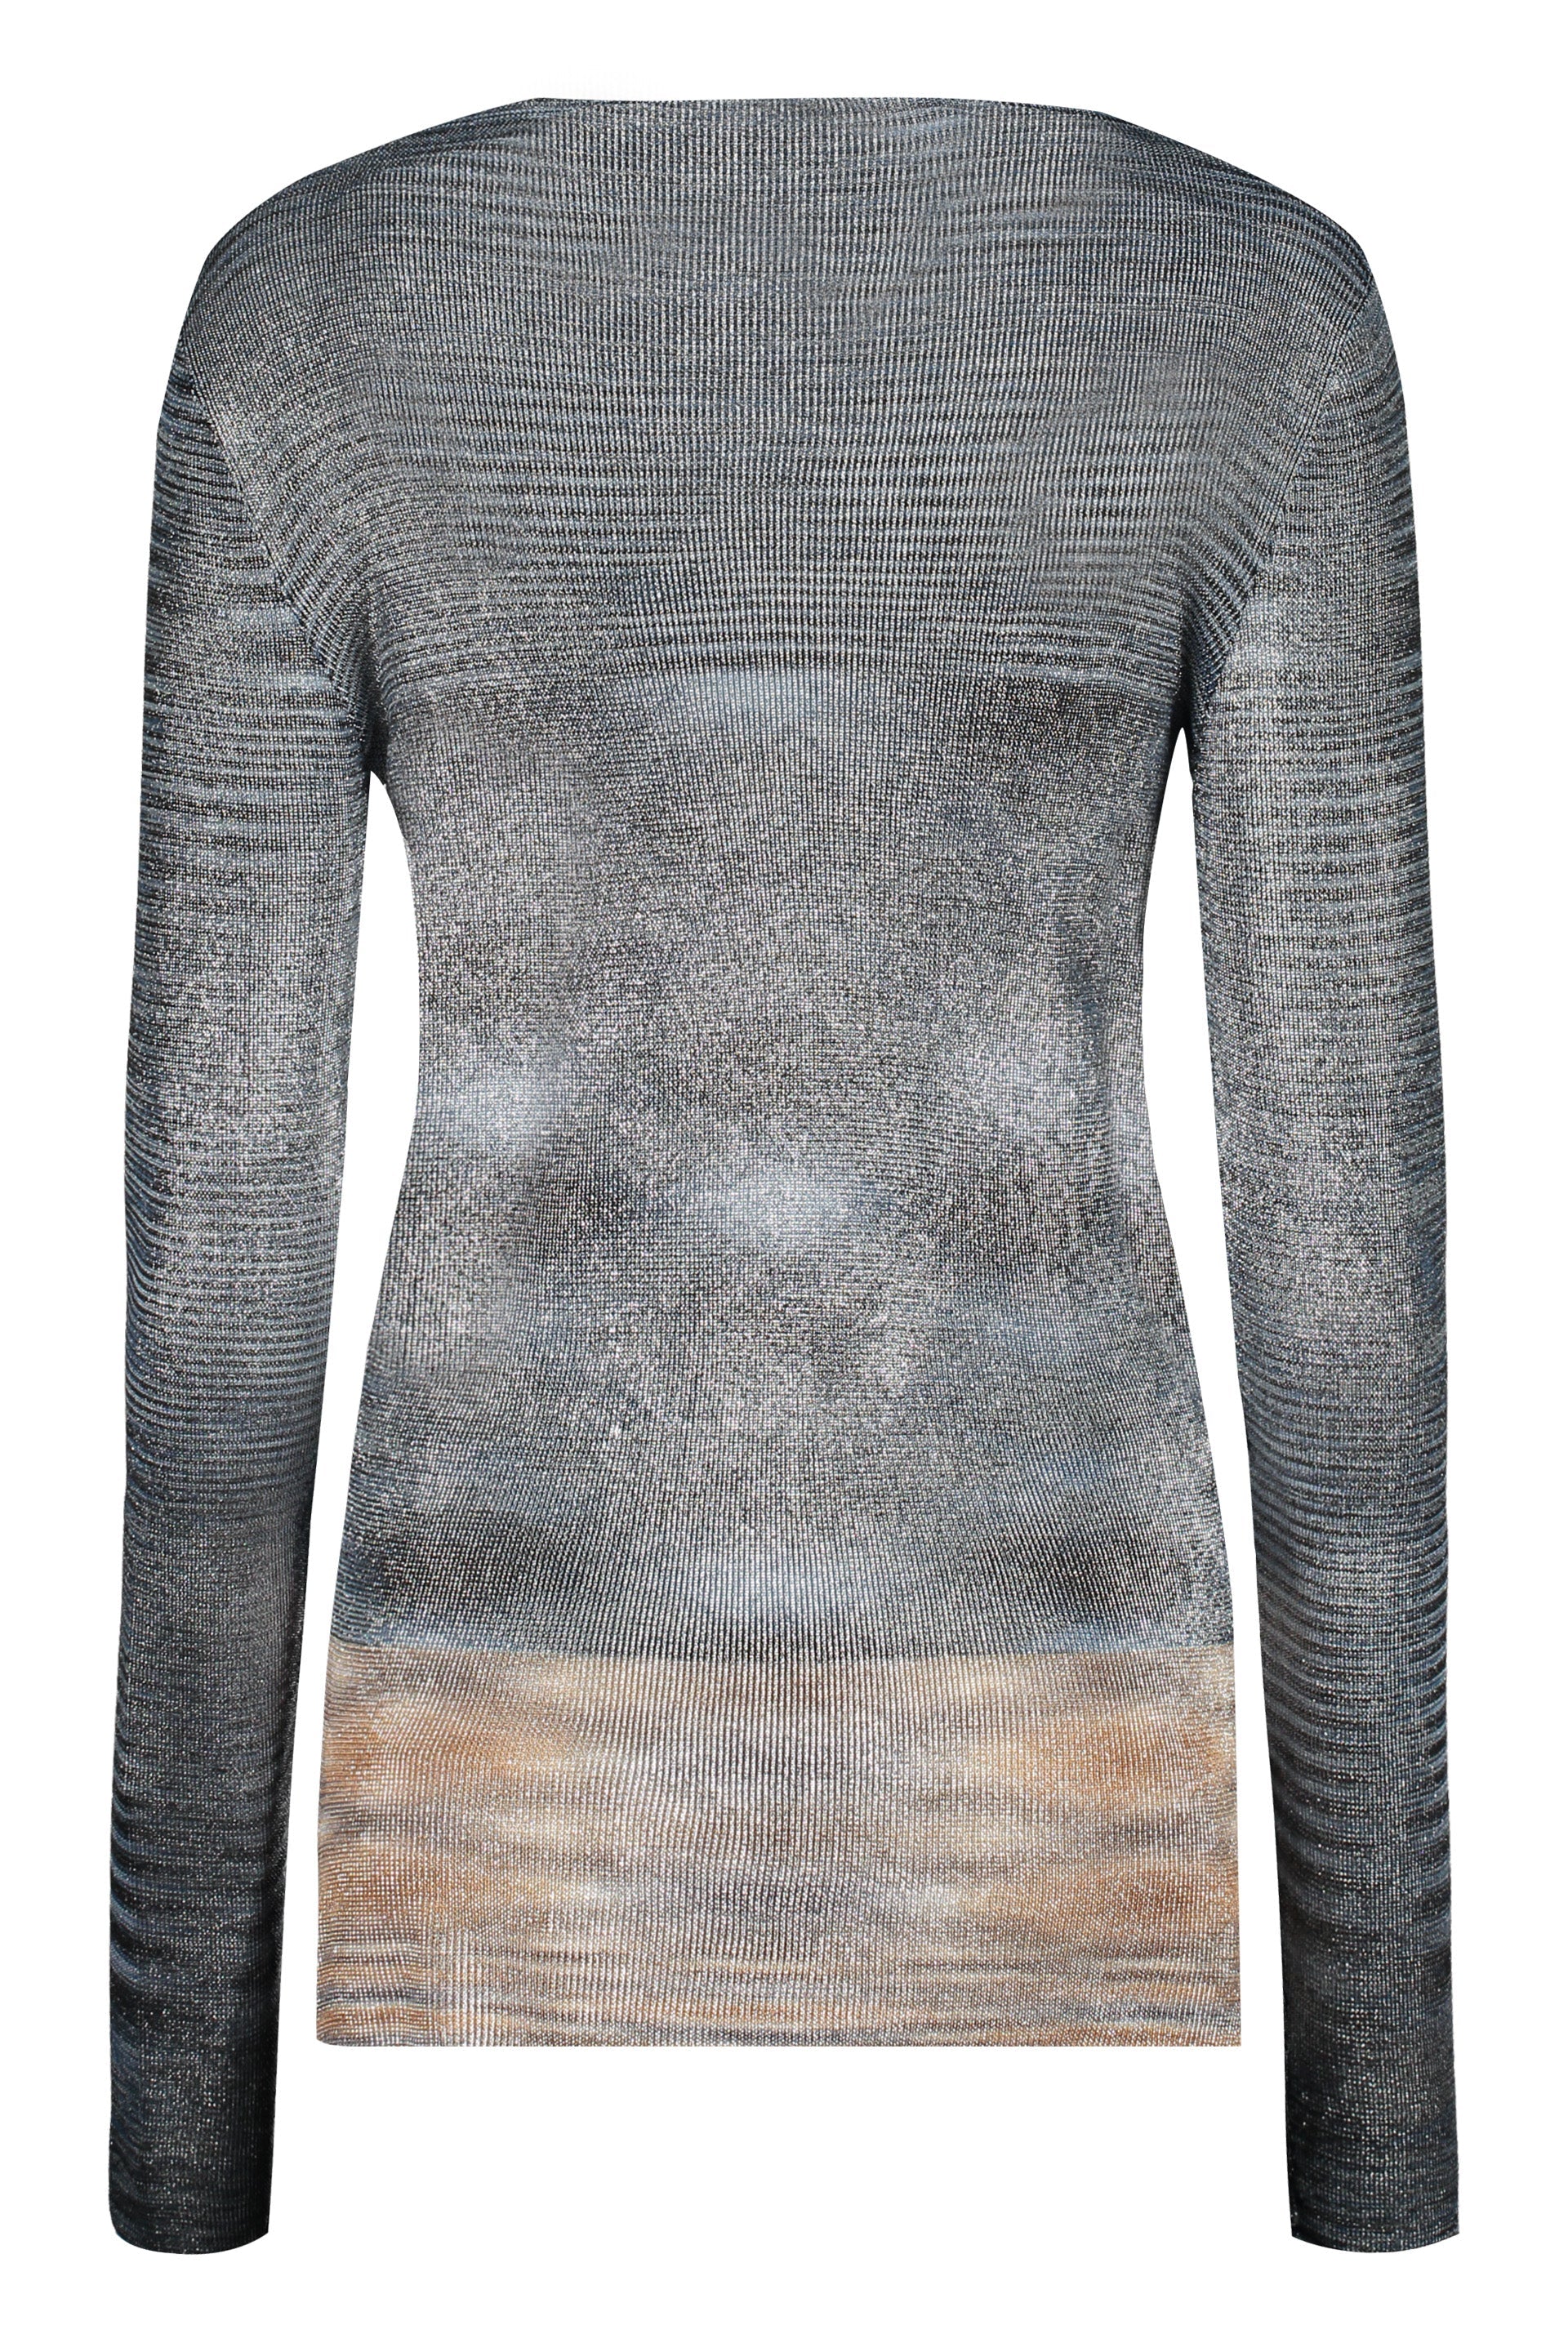 Knitted viscosa-blend top